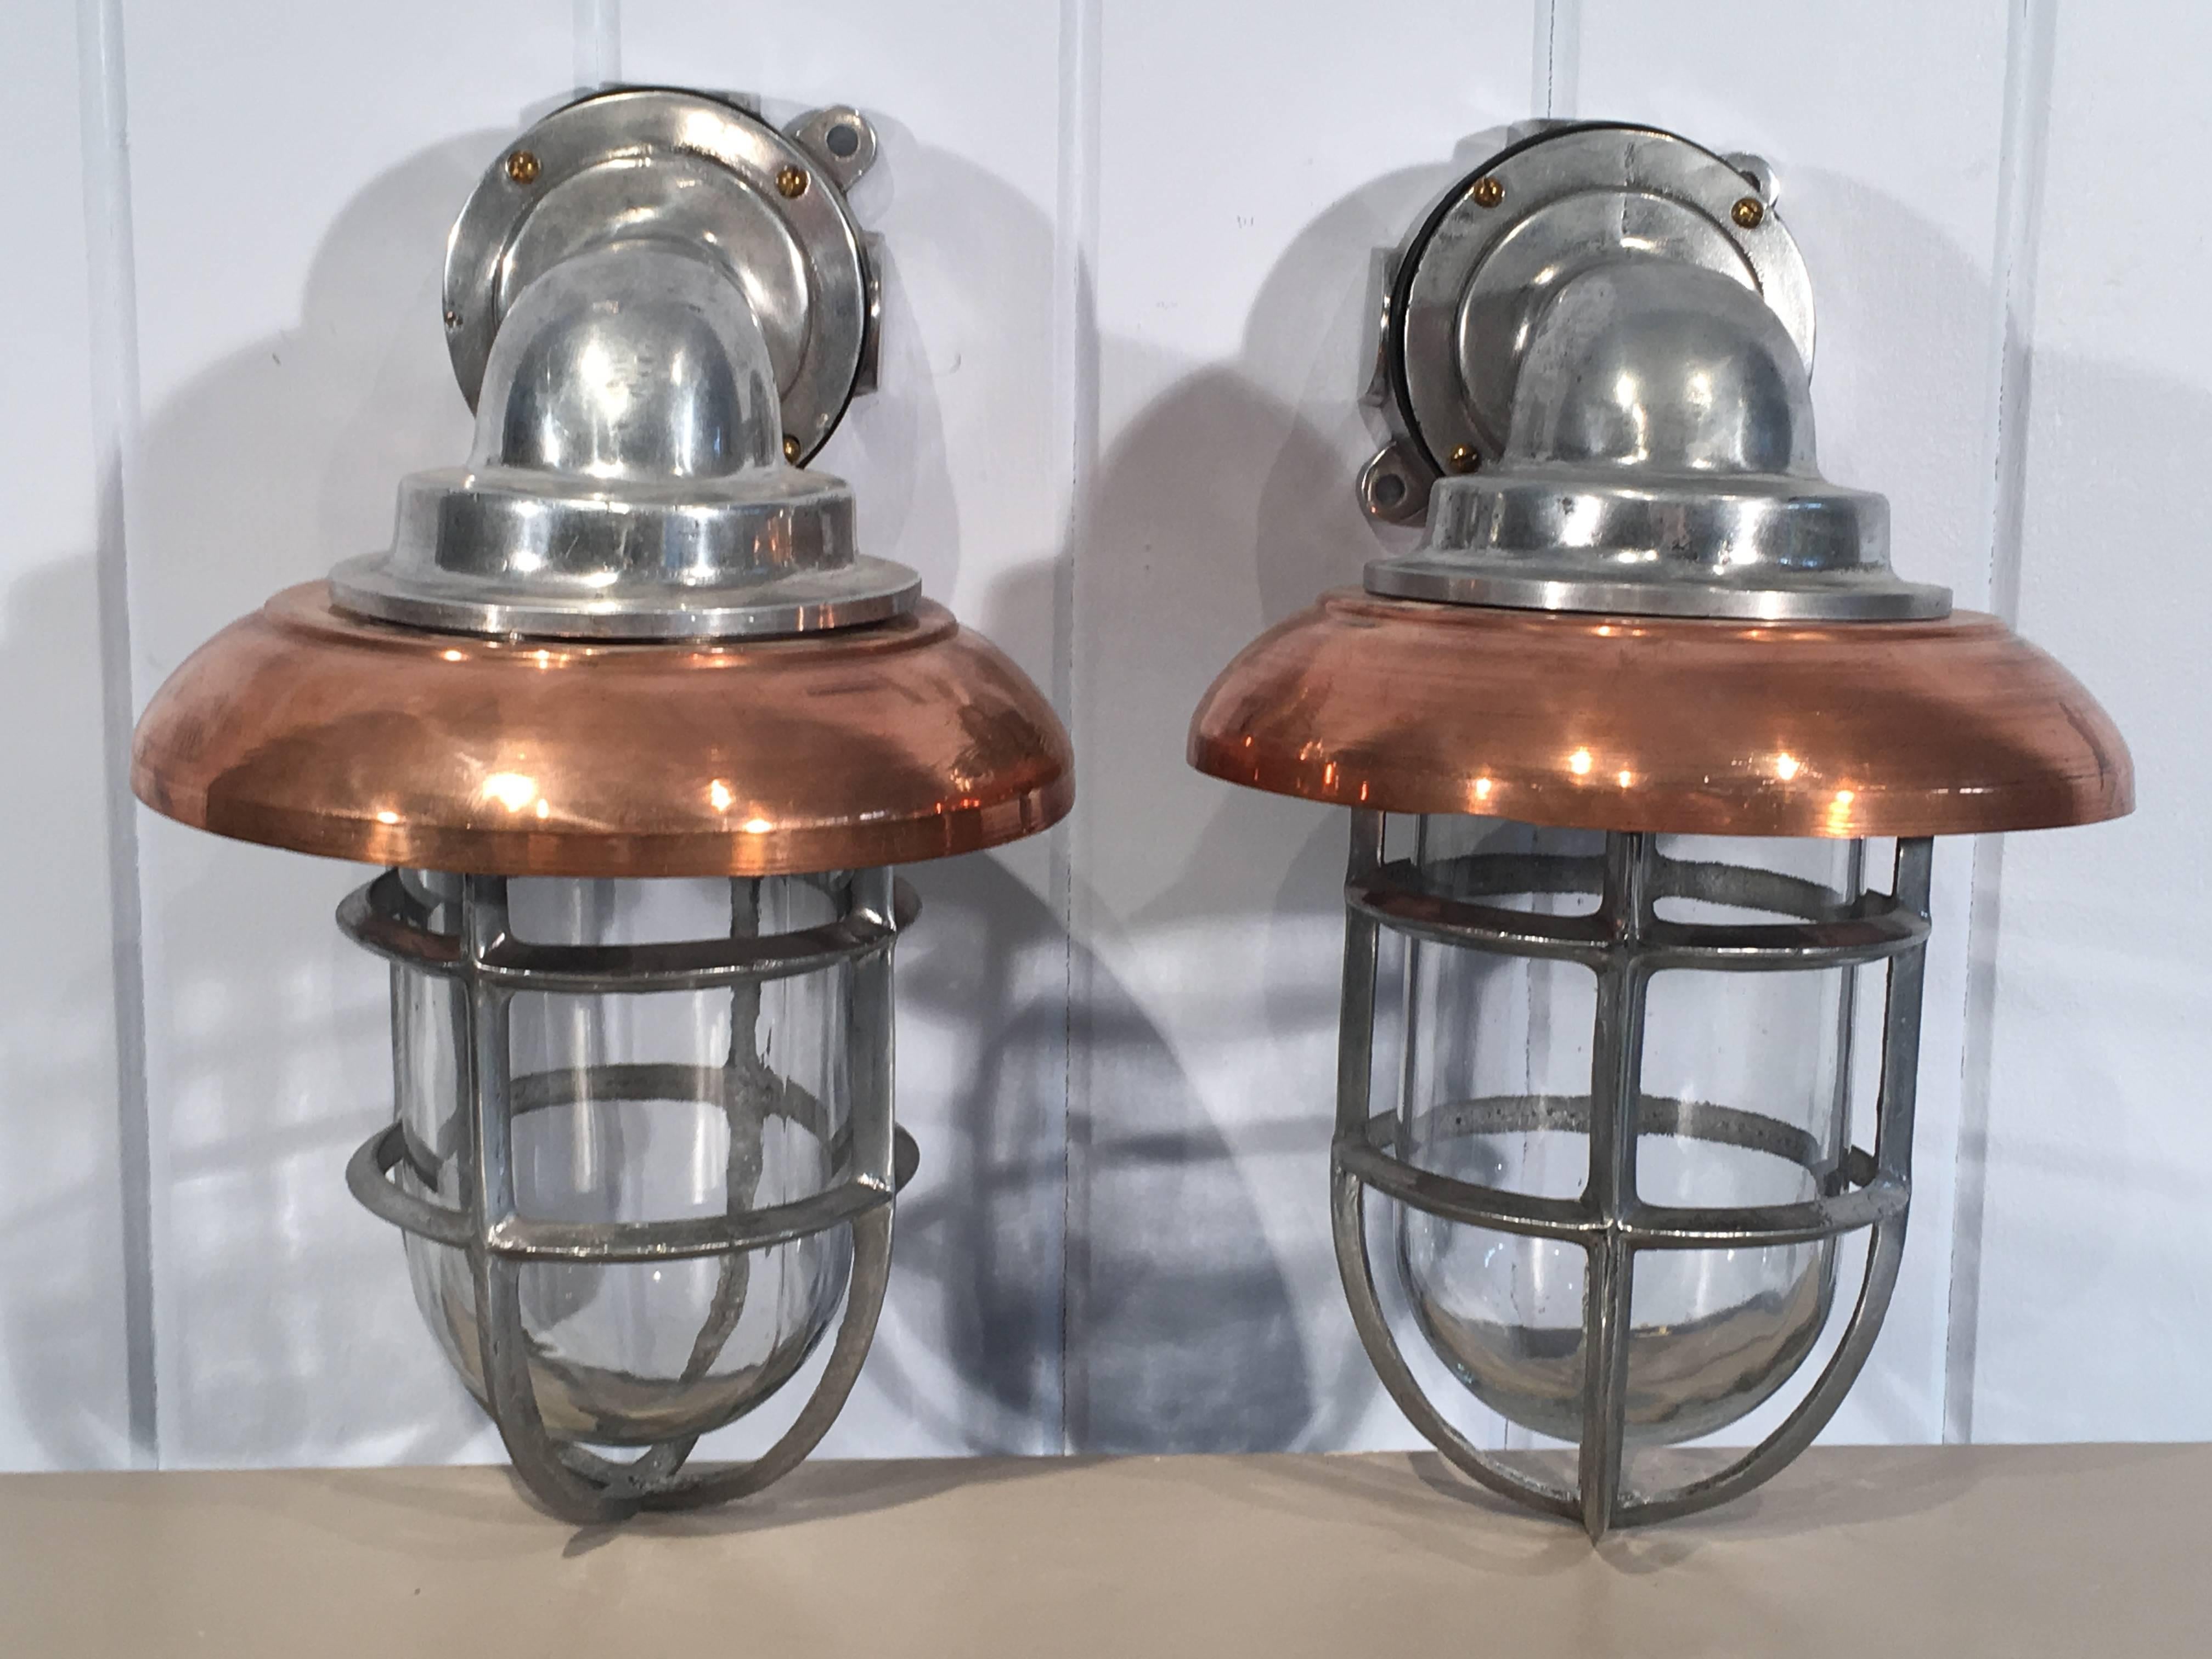 These polished aluminum ship's lamps have been completely restored and now sport removeable replacement copper shades. Their clean Industrial Design mixes well with a multitude of styles and they can be mounted indoors or out. Perfect in a bathroom